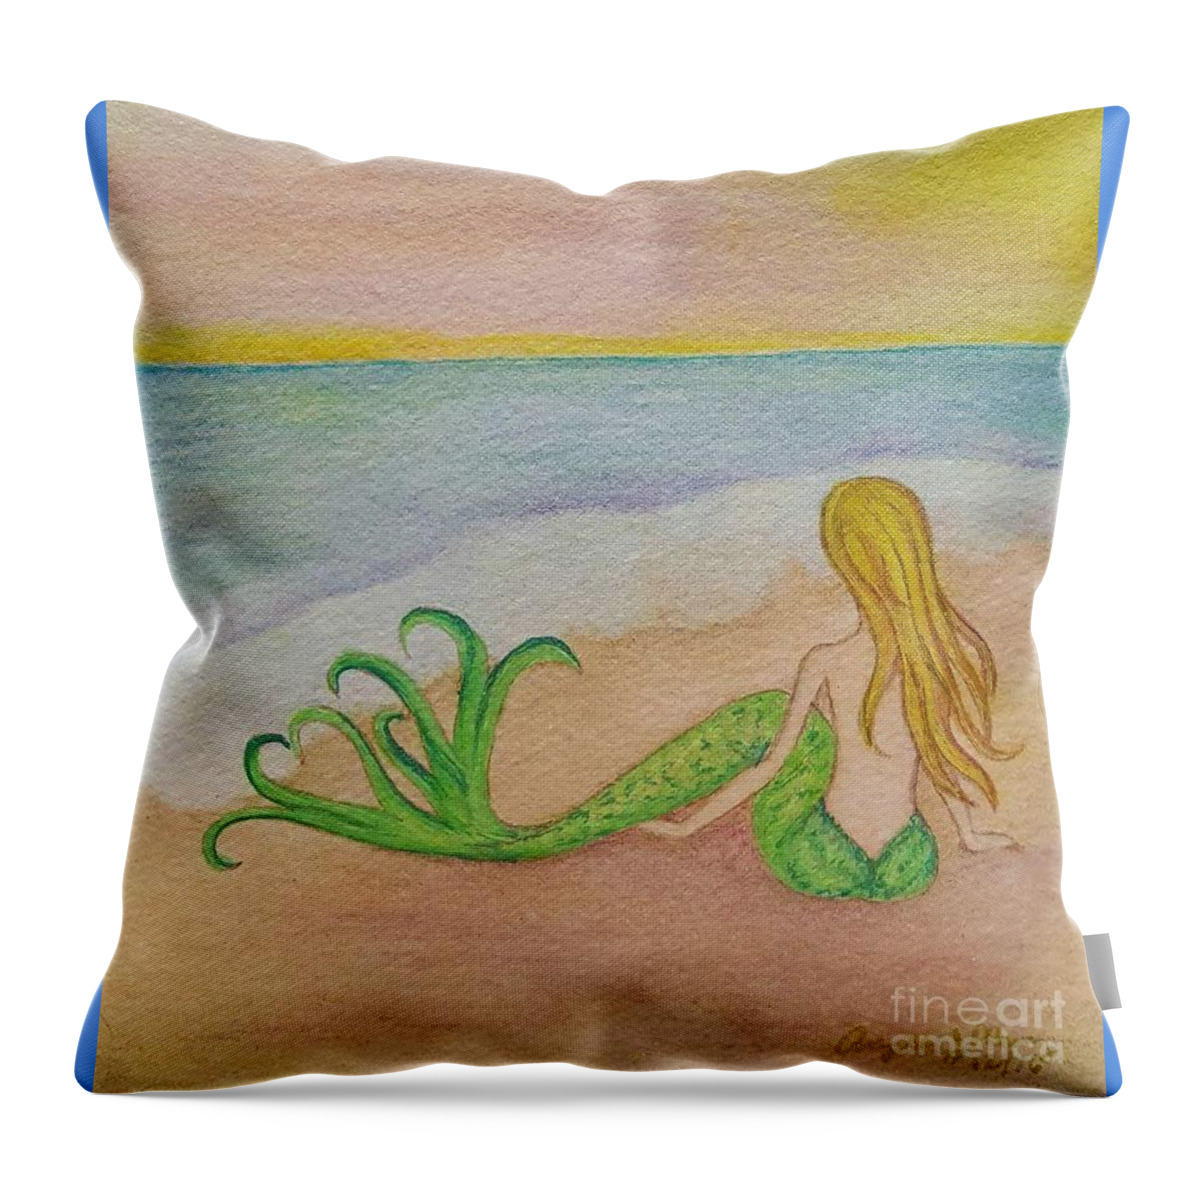 Mermaid Throw Pillow featuring the painting Mermaid Sunset by Angela Murray